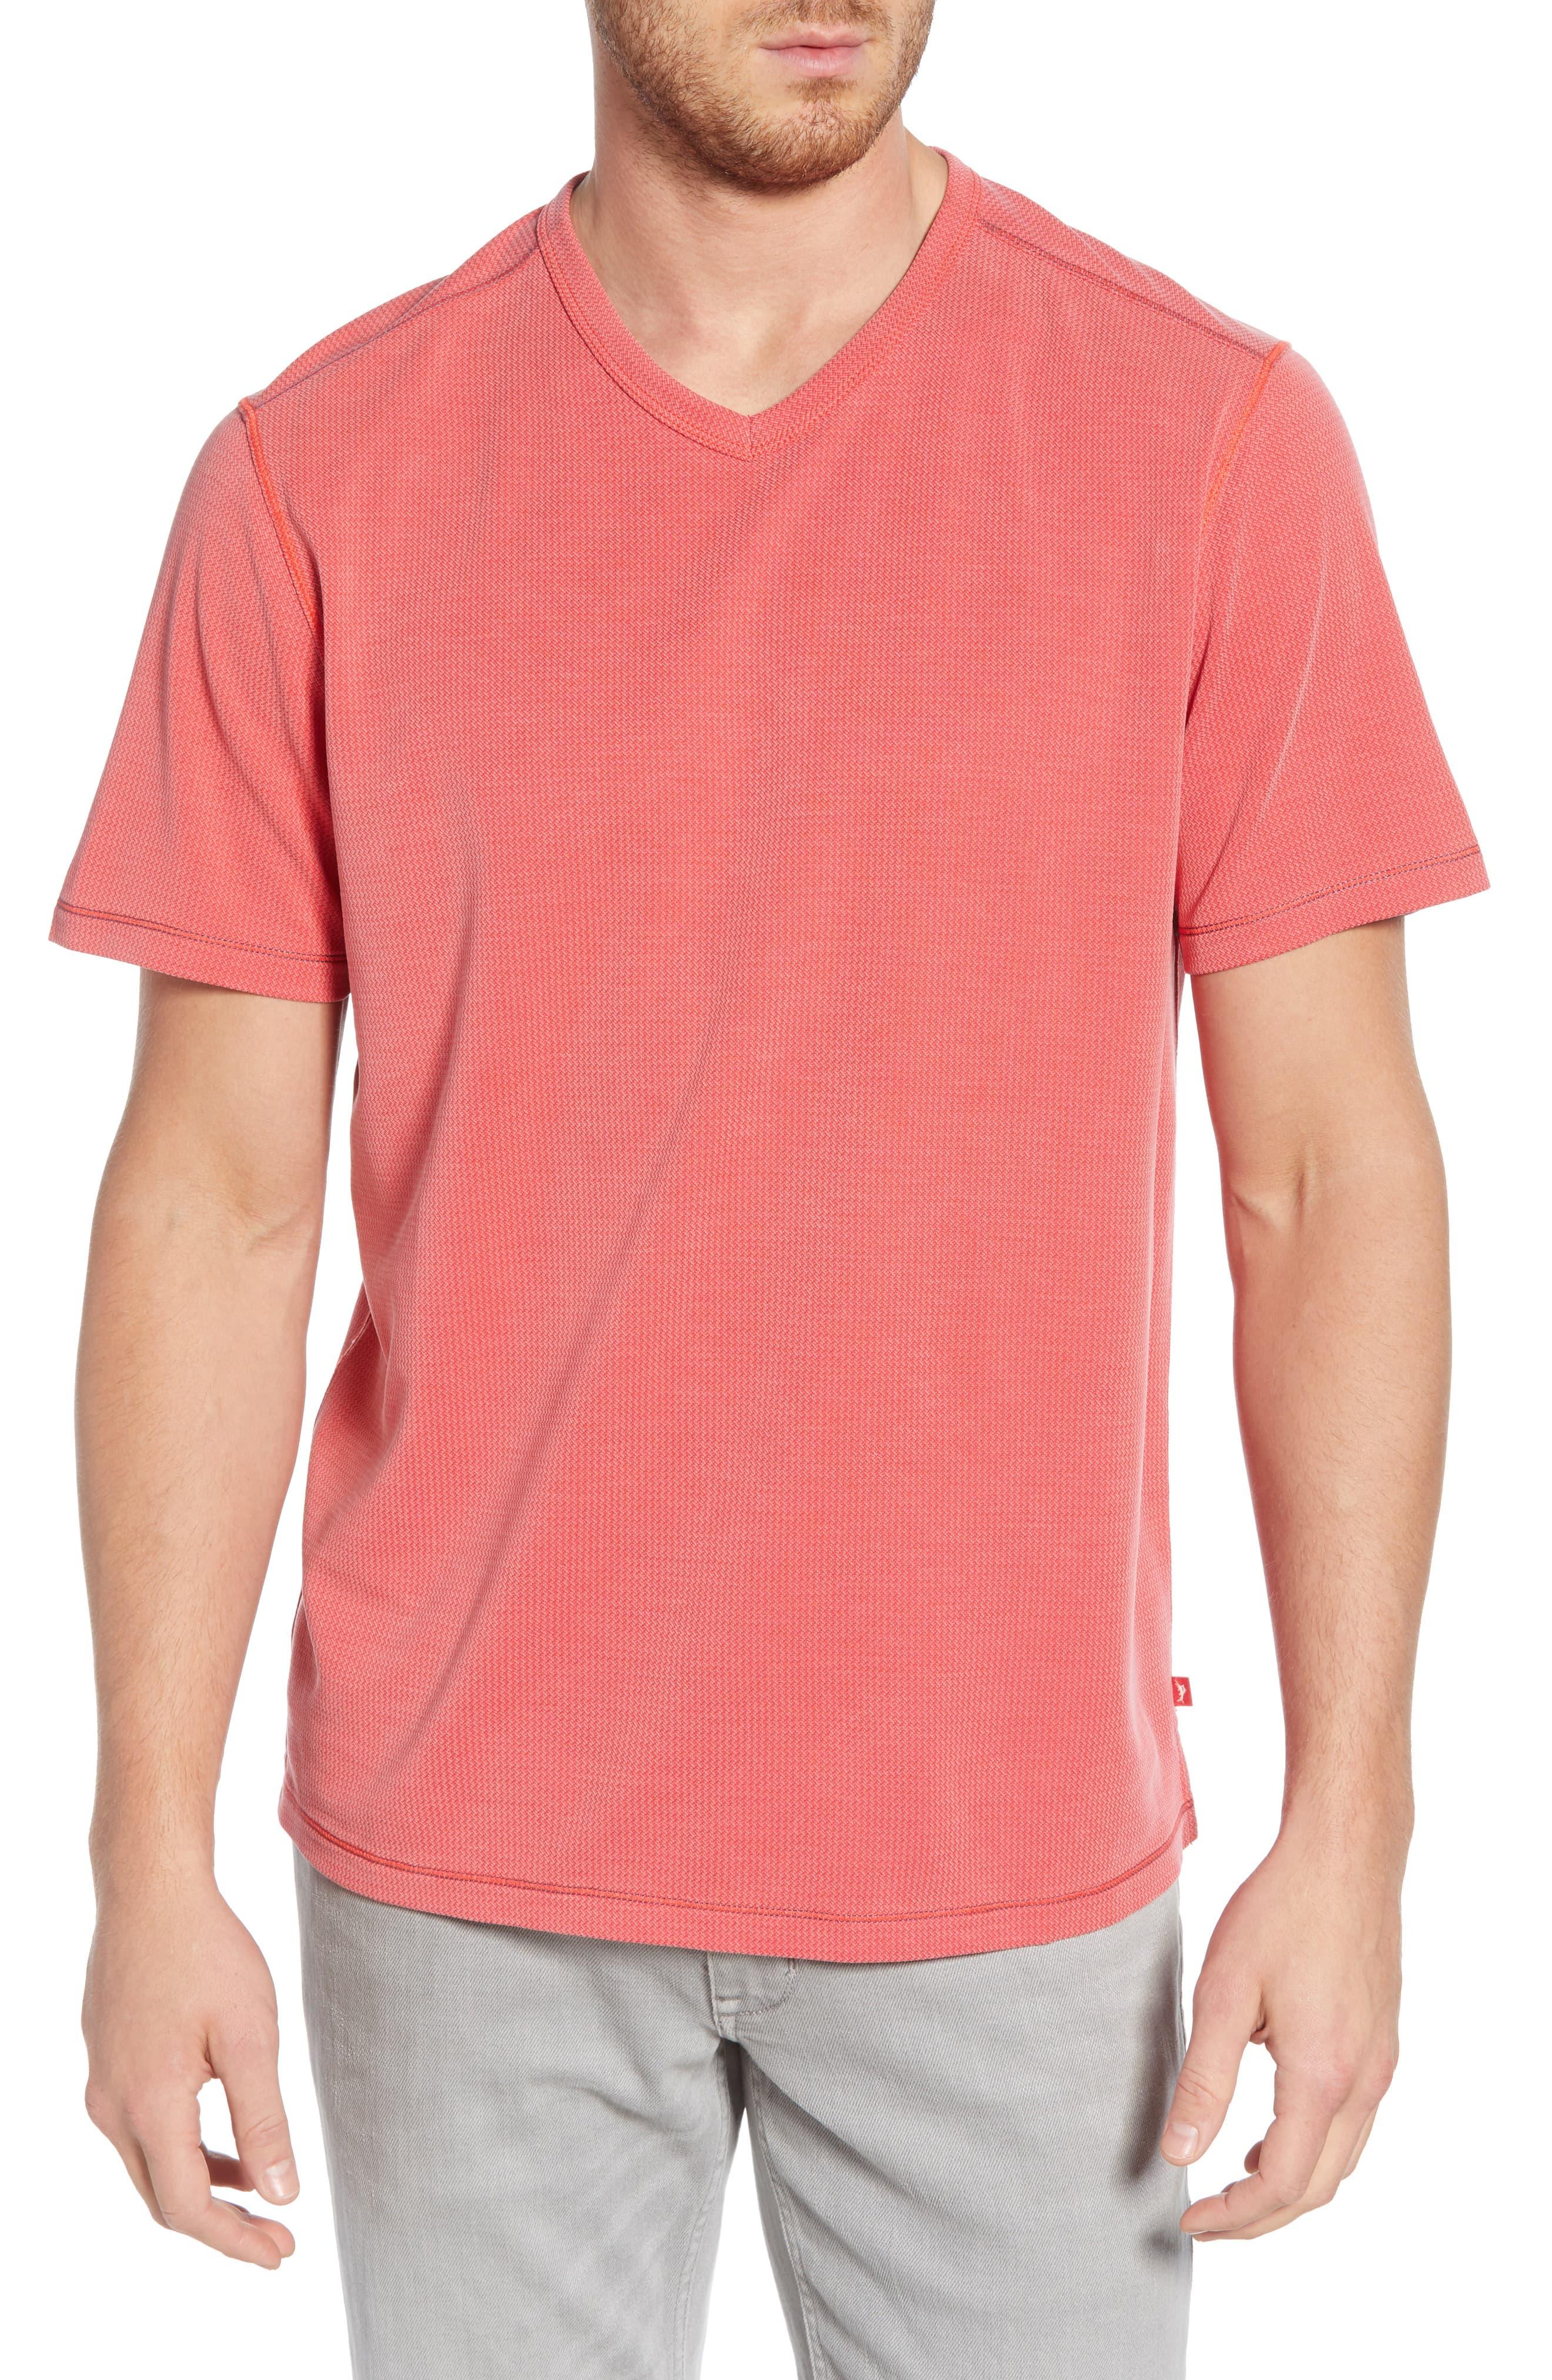 Tommy Bahama Tropicool Paradise V-neck T-shirt in Pink for Men - Lyst